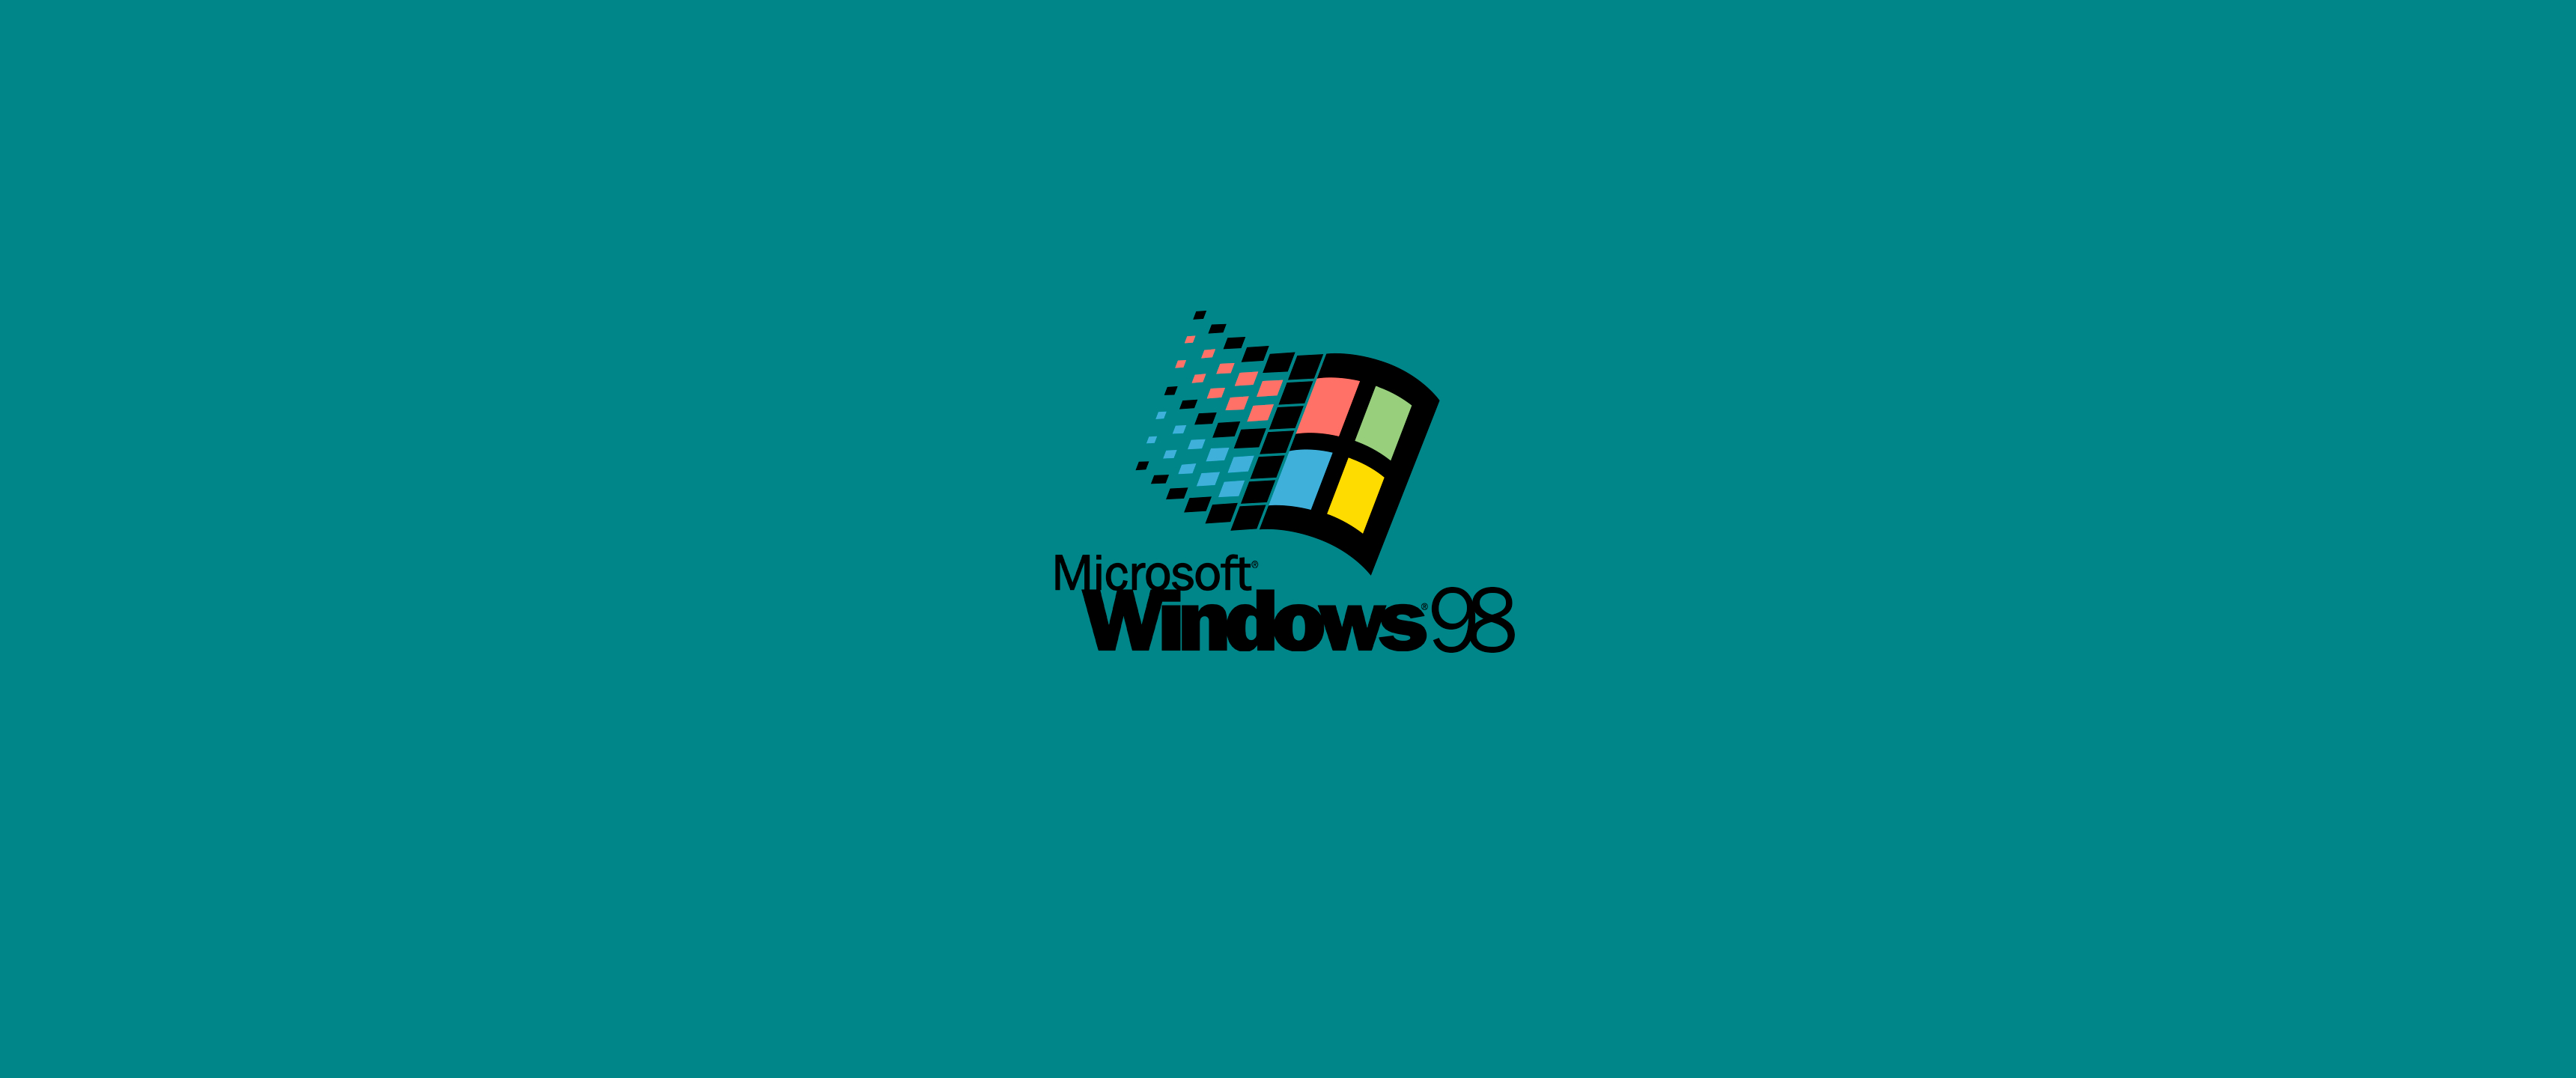 3440x1440 Windows 98 HD Wallpapers and Backgrounds